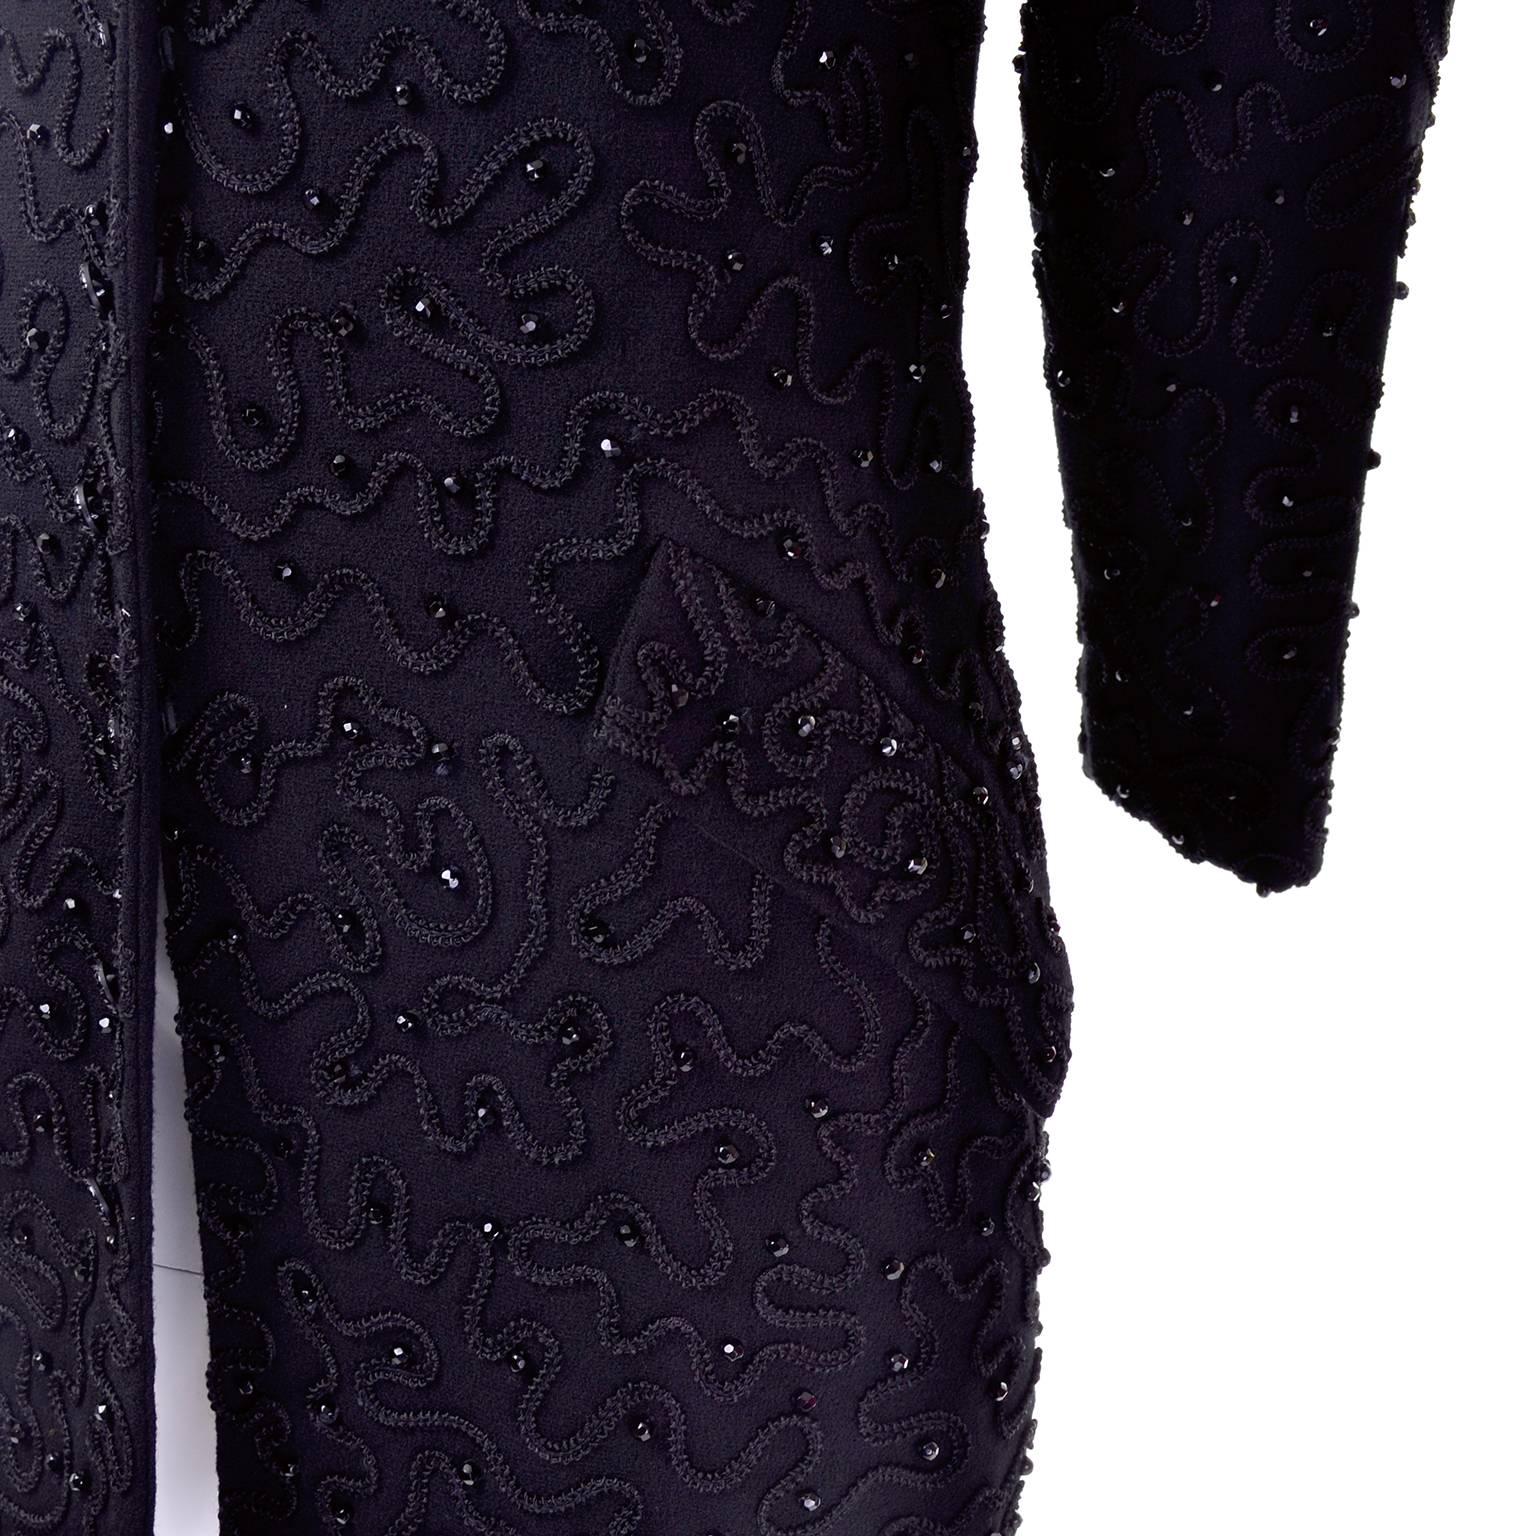 Early Donna Karan Black Label Beaded Black Evening Jacket  In Excellent Condition For Sale In Portland, OR